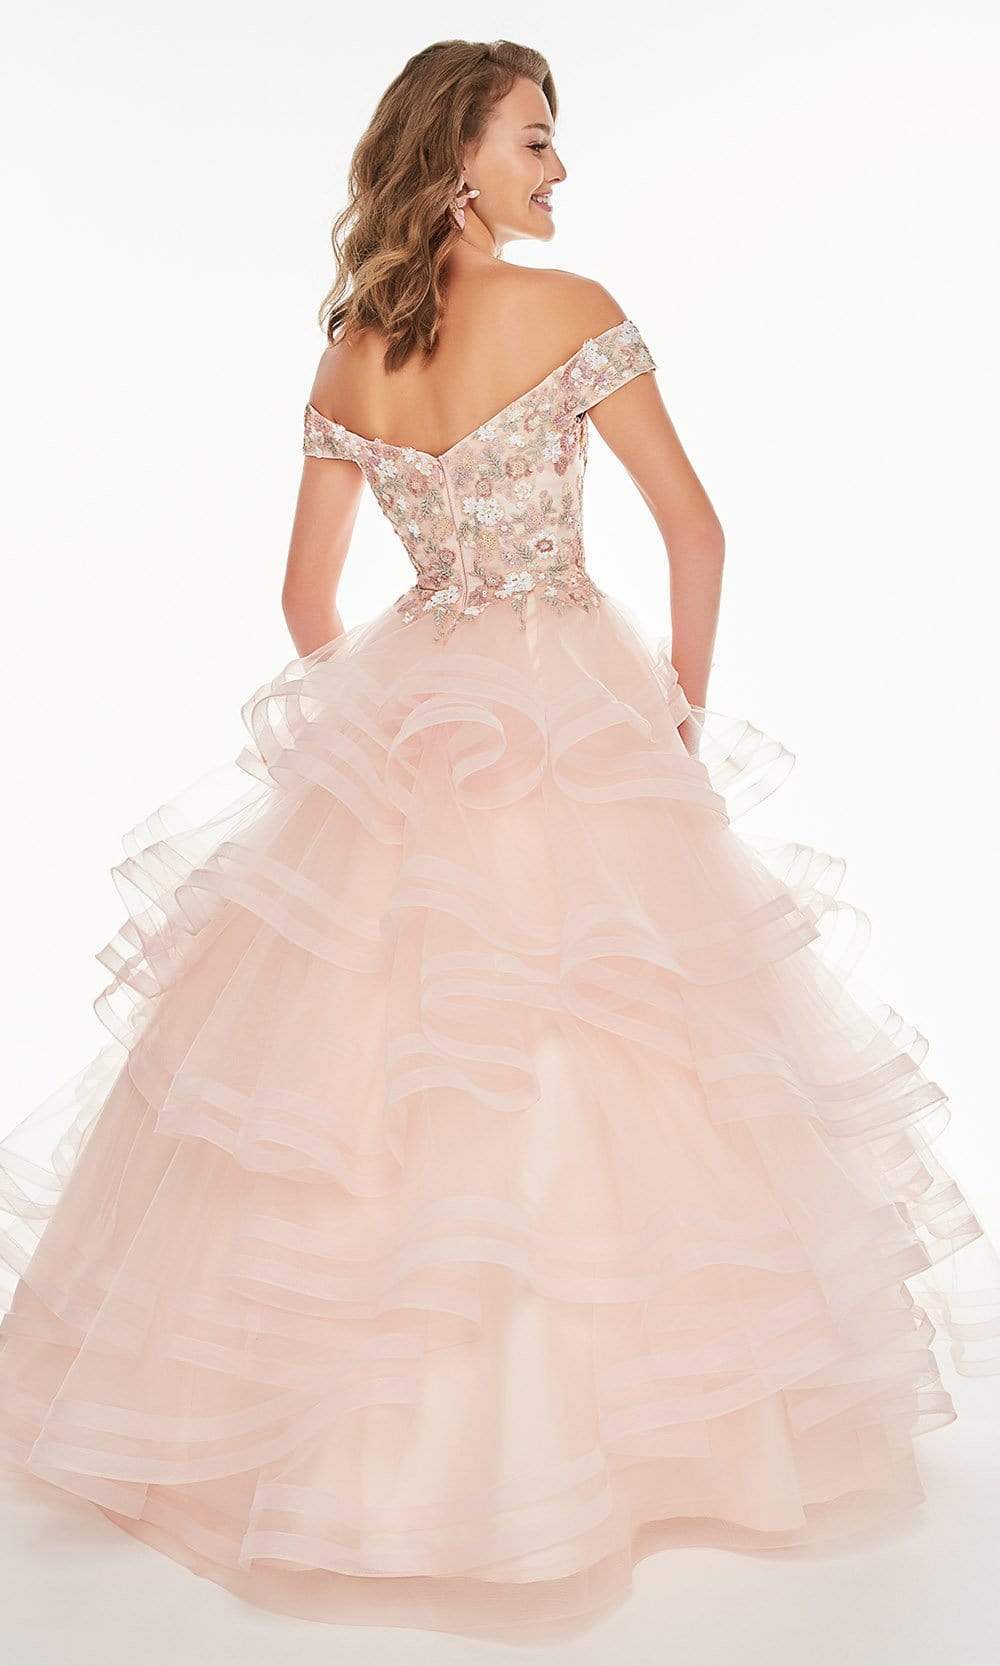 Tiffany Exclusive - 46237 Embroidered Bodice Tiered Tulle Ballgown Prom Dresses